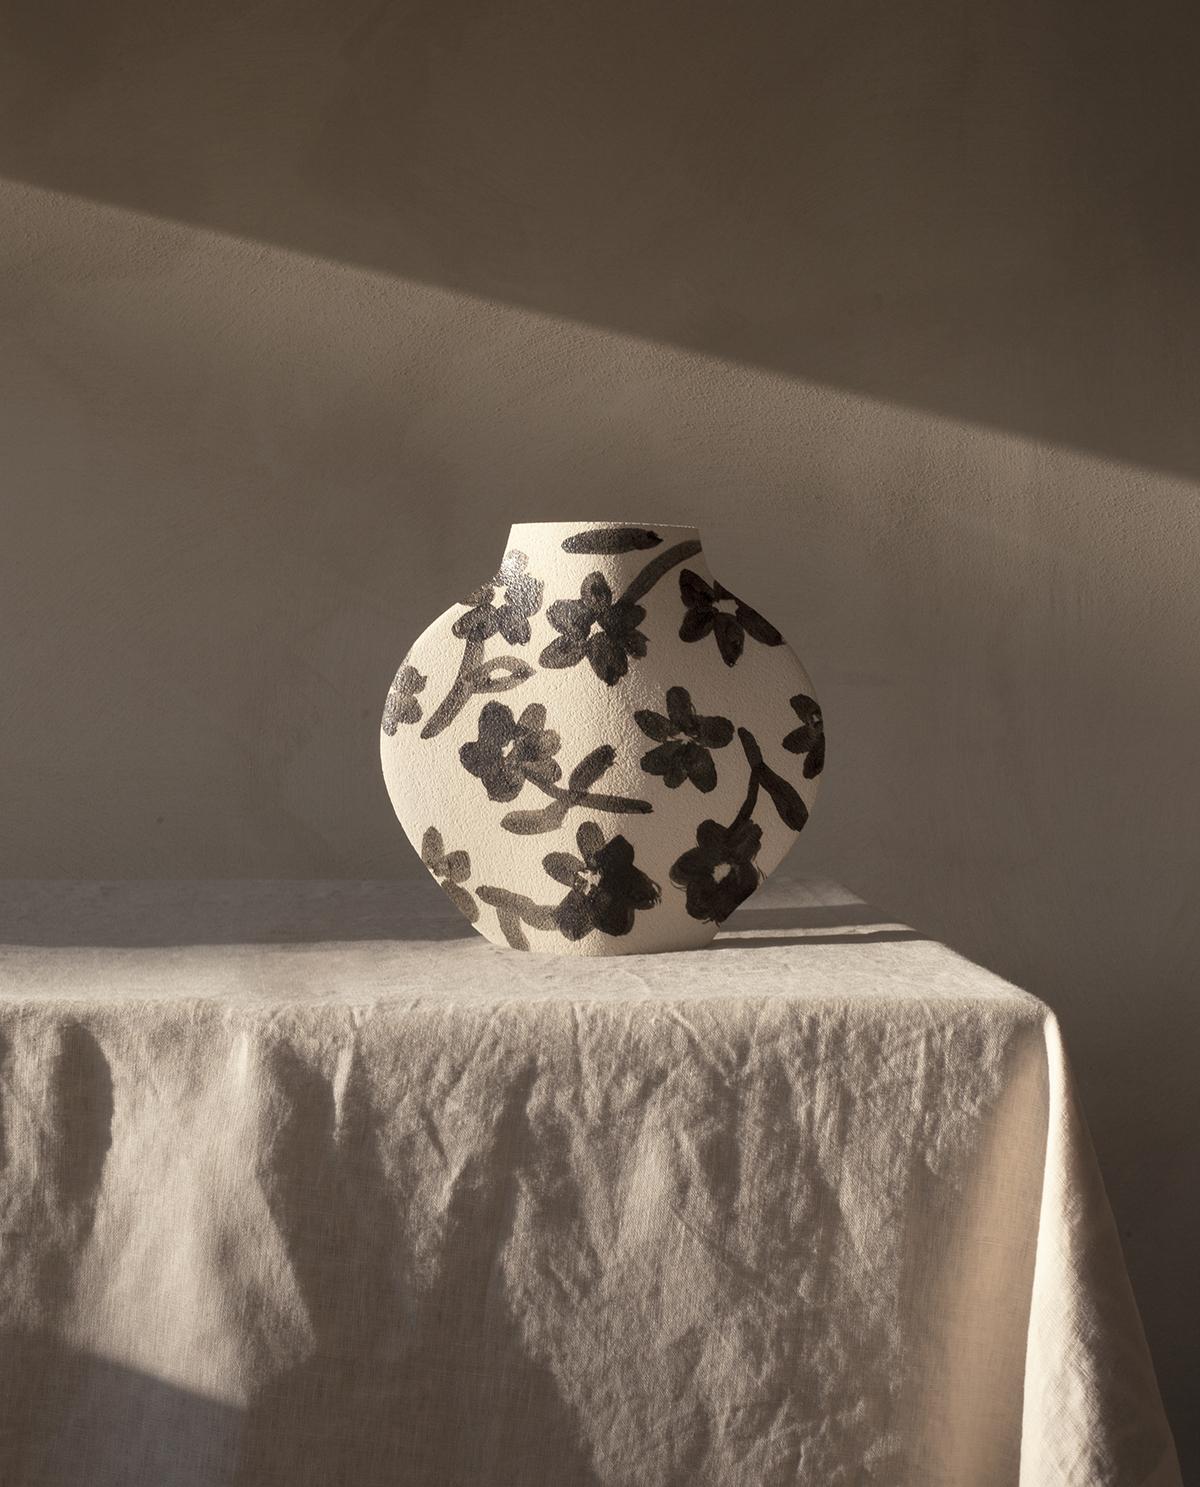 Clay 21st Century 'Flowers Pattern' Vase in White Ceramic, Hand-Crafted in France For Sale